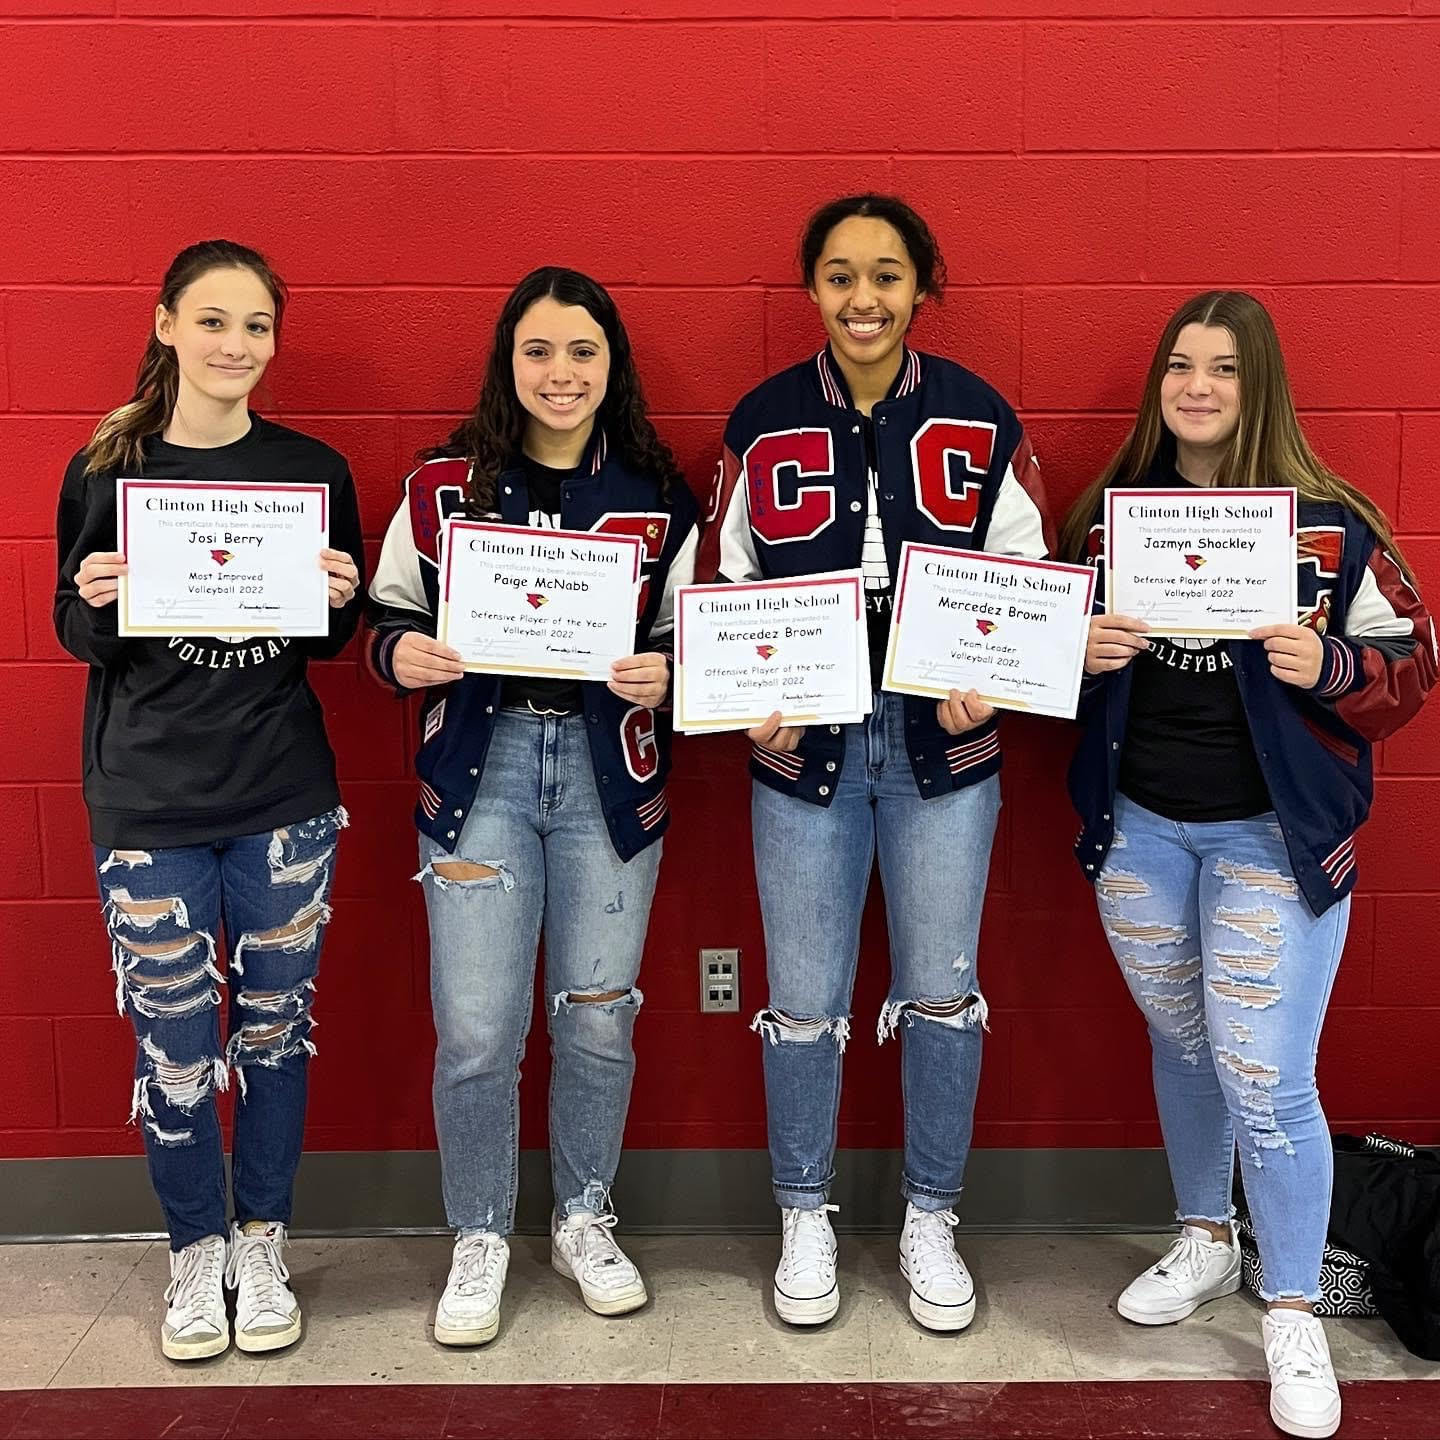 THIS YEAR'S  Cardinals Volleyball season officially reaches its close as Lady Cards cement the year with annual post-season awards. The awards, voted on by the team, are perhaps the highest honor of all, as they represent the positive impact these young women have made on their peers. As Phil Jackson once put it, “The strength of the team is each individual member—the strength of each individual member is the team.”  This Year’s Team Post-Season Awards Are As Follows: Most improved - Josi Berry ; Offensive player of the year - Mercedez Brown ; Defensive player of the year - Paige McNabb and Jazmyn Shockley ; Team Leader - Mercedez Brown